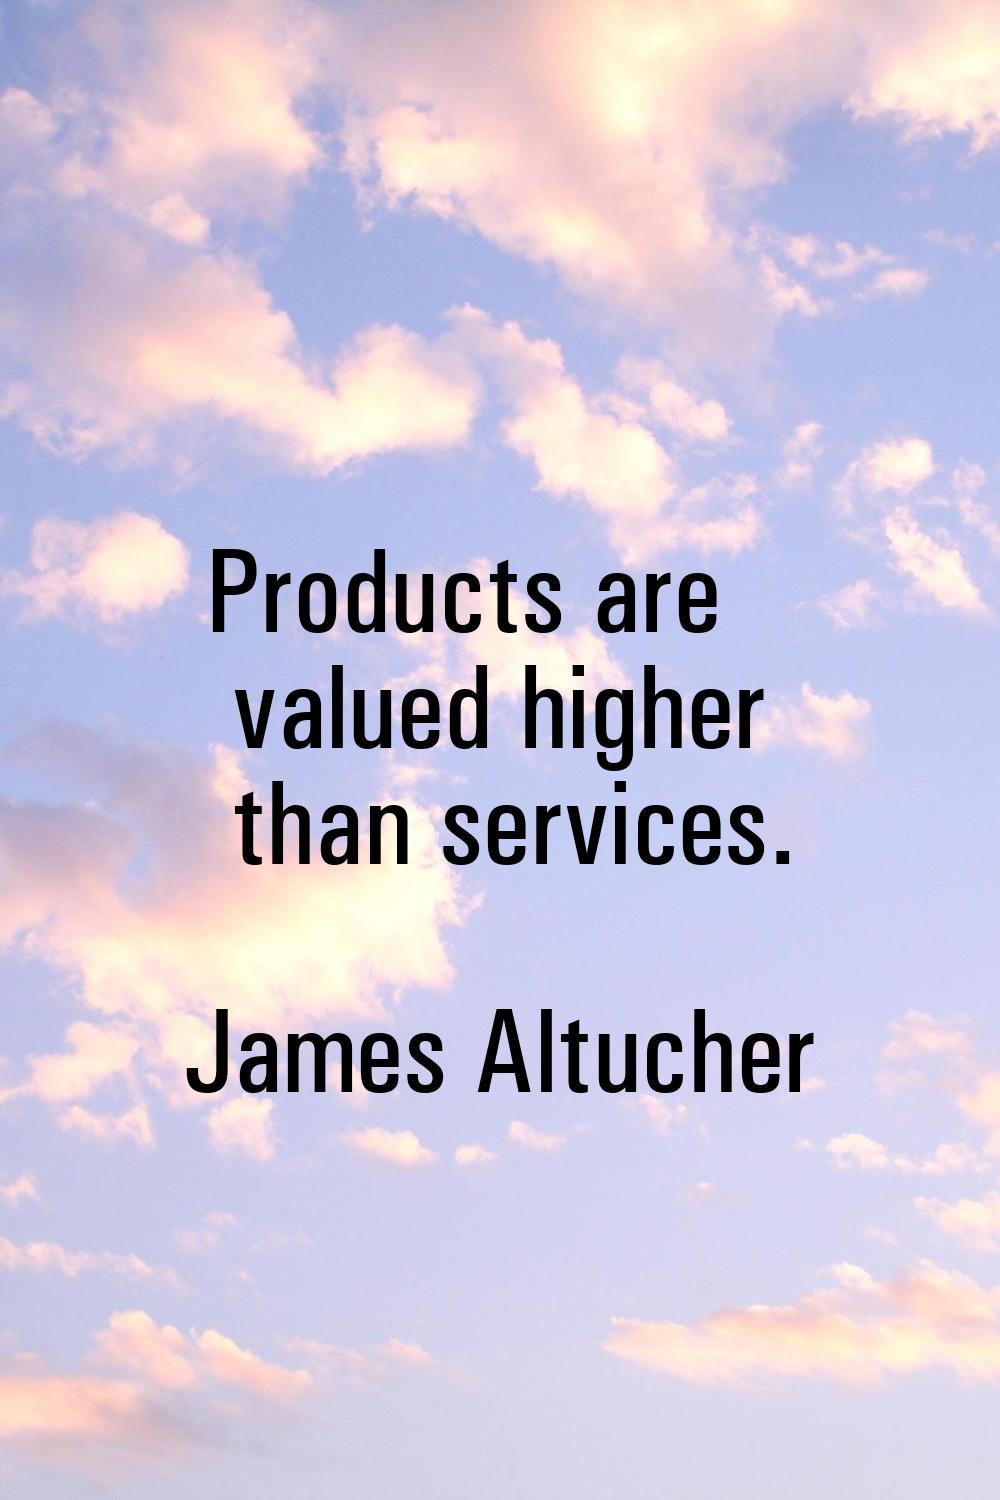 Products are valued higher than services.